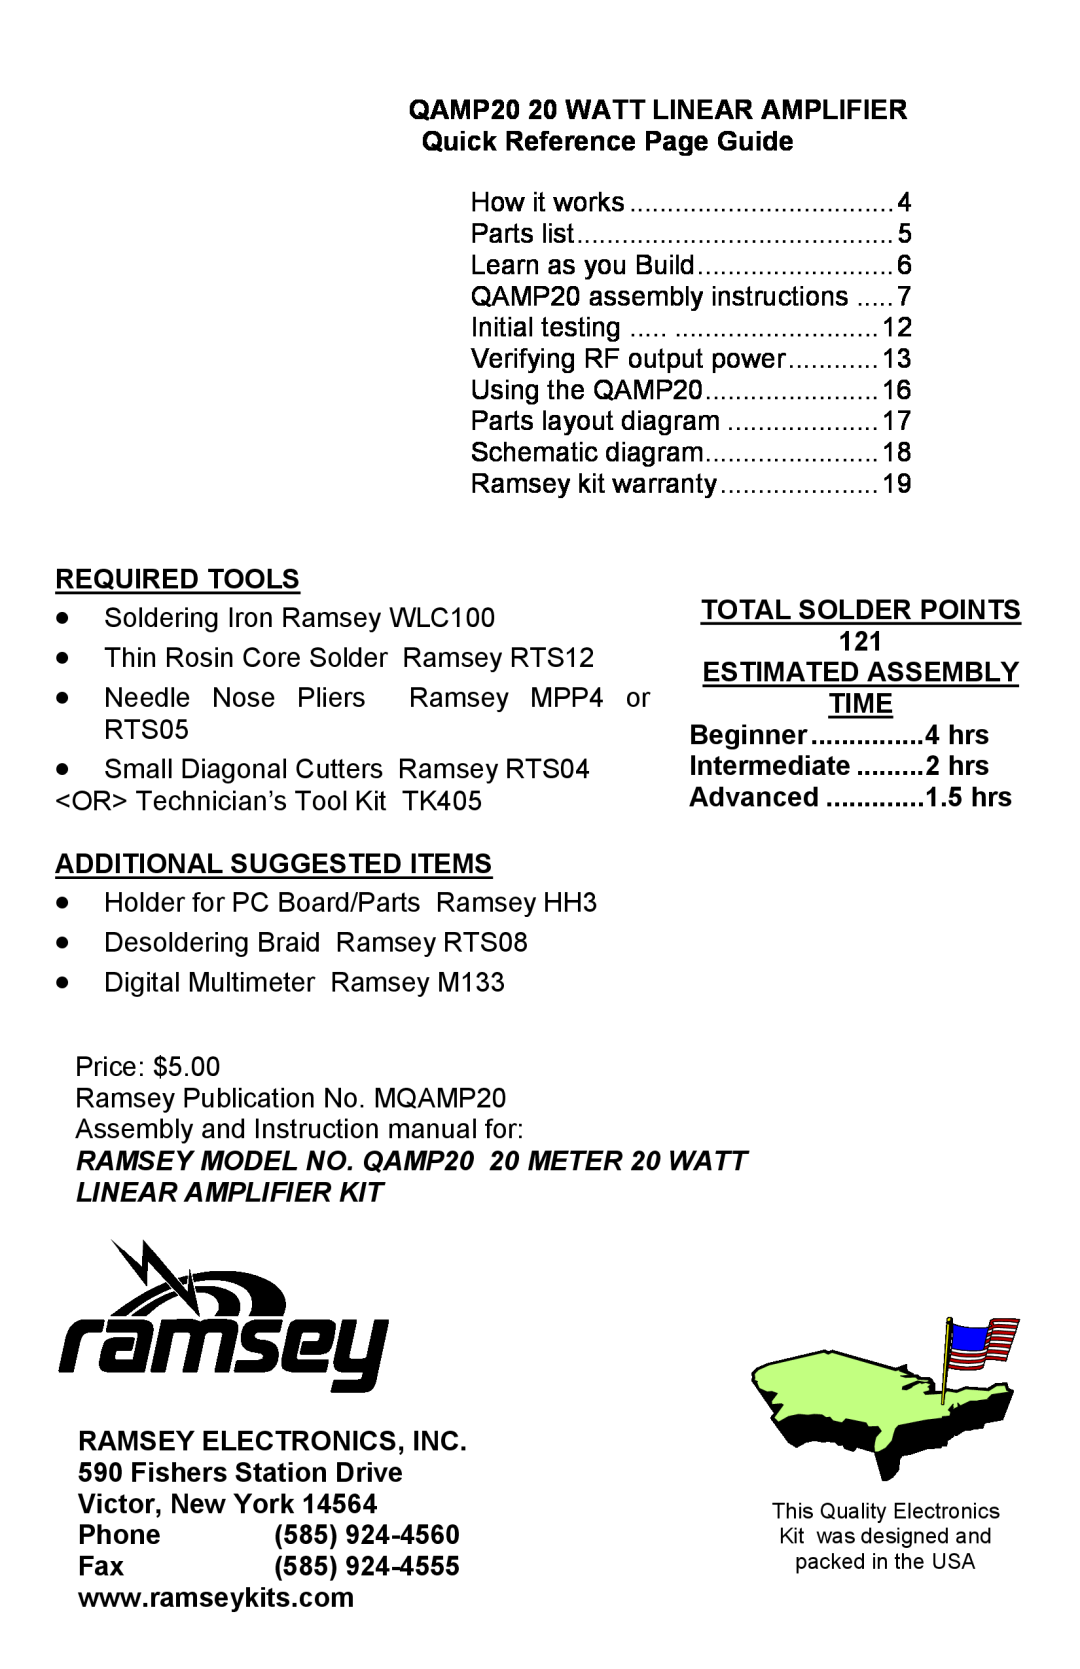 Ramsey Electronics QAMP20 20 WATT LINEAR AMPLIFIER, Quick Reference Page Guide, Required Tools, Total Solder Points 